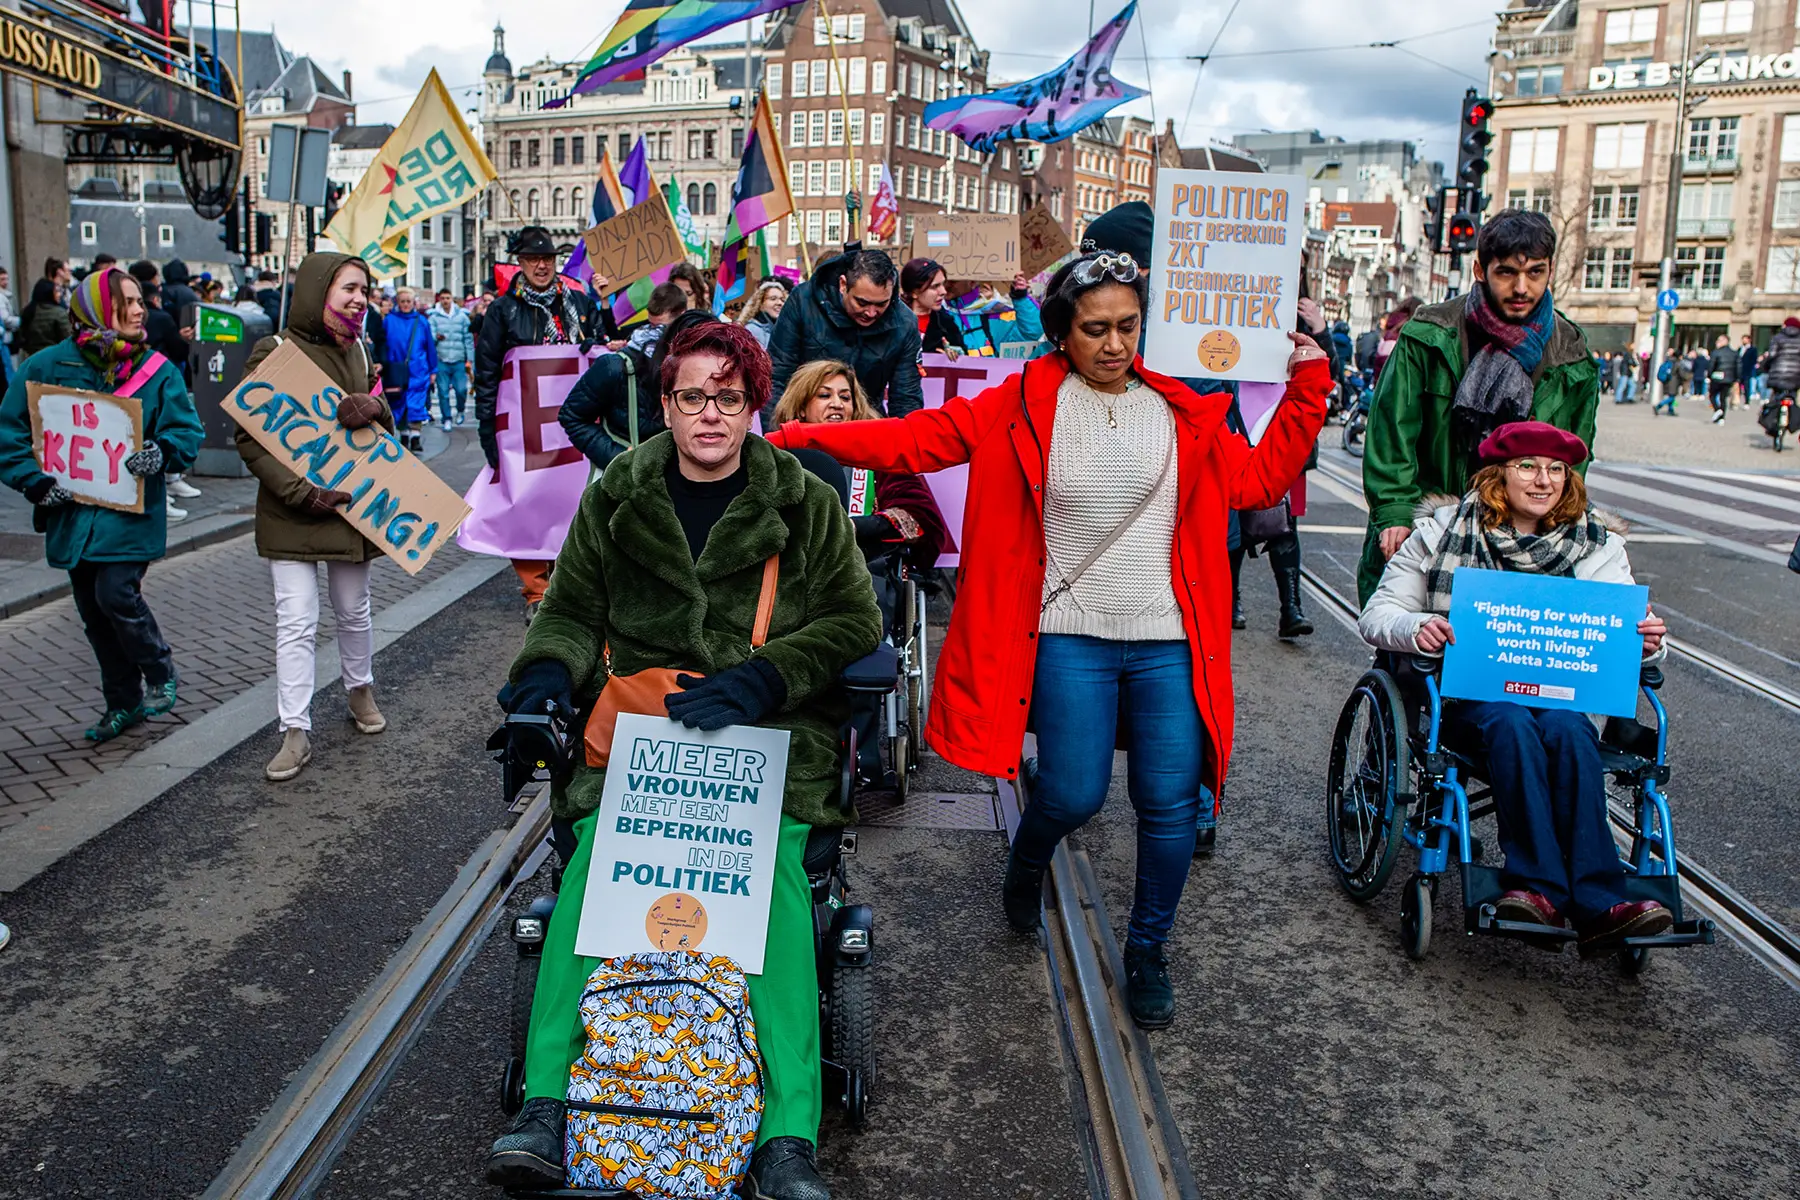 Women in mobility scooters, wheelchairs, and walking with feminist placards